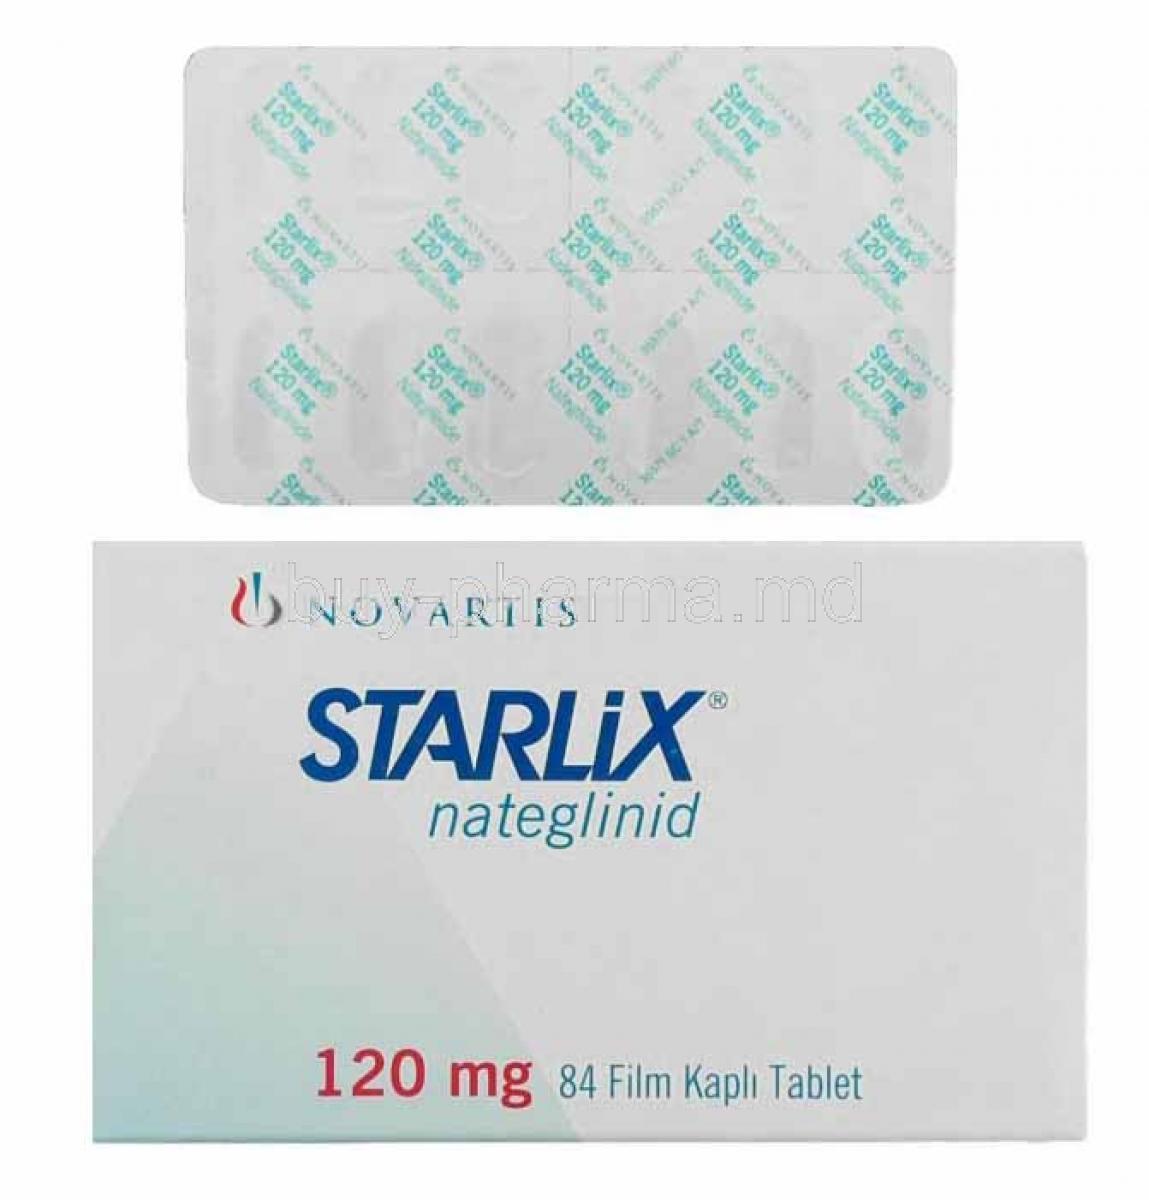 Starlix, Nateglinide box and tablets